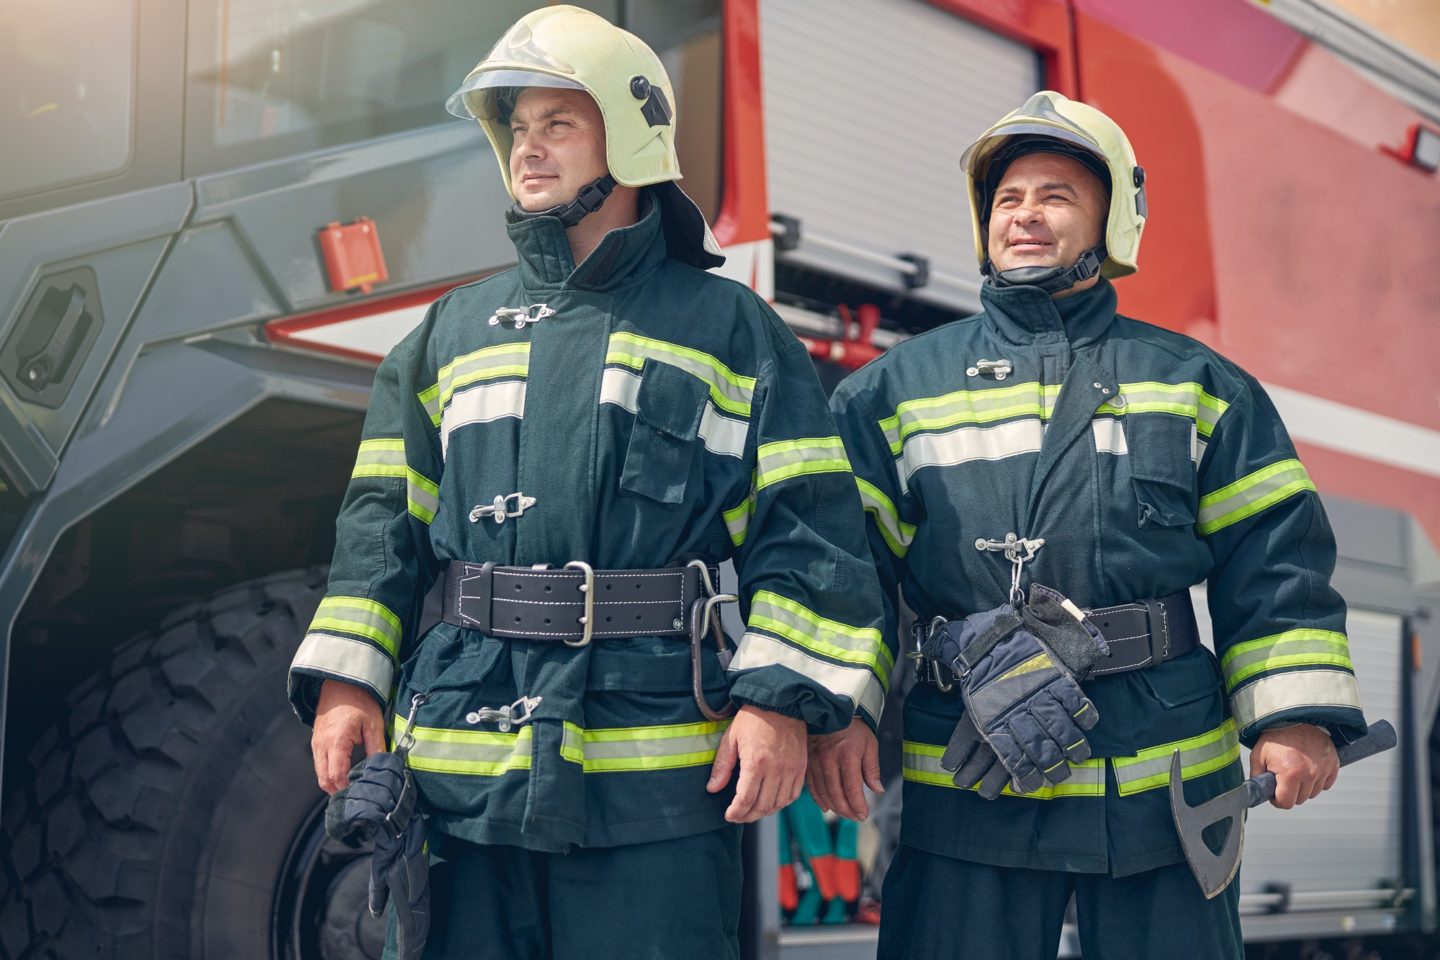 Males wearing protective fire uniform with helmets on head